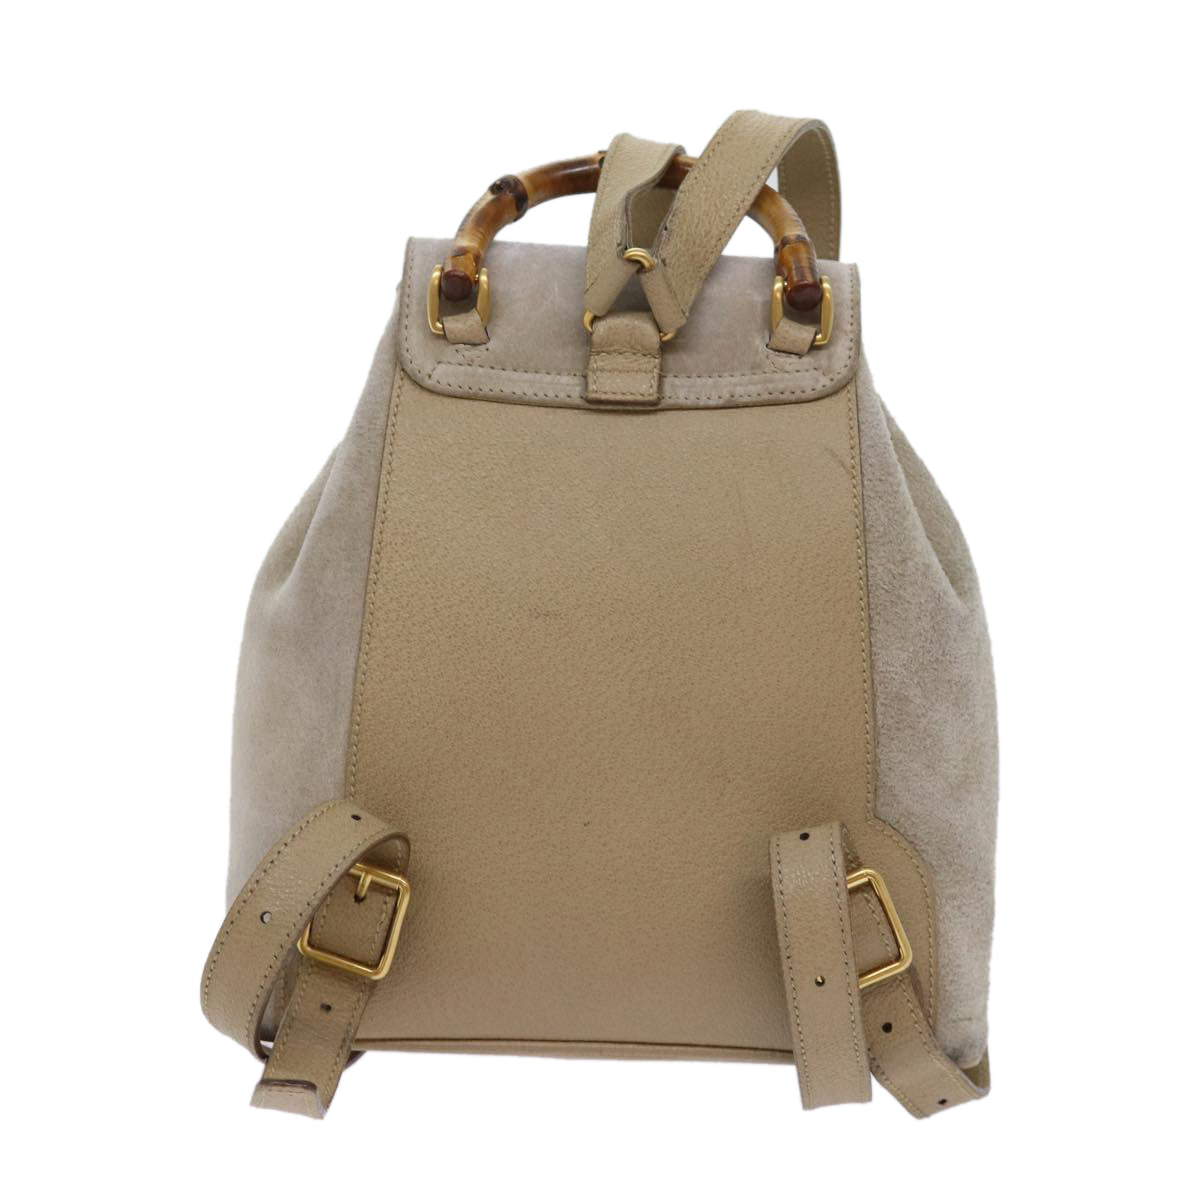 GUCCI Bamboo Backpack Suede Beige 003 3444 0030 Auth yk11065 - 0